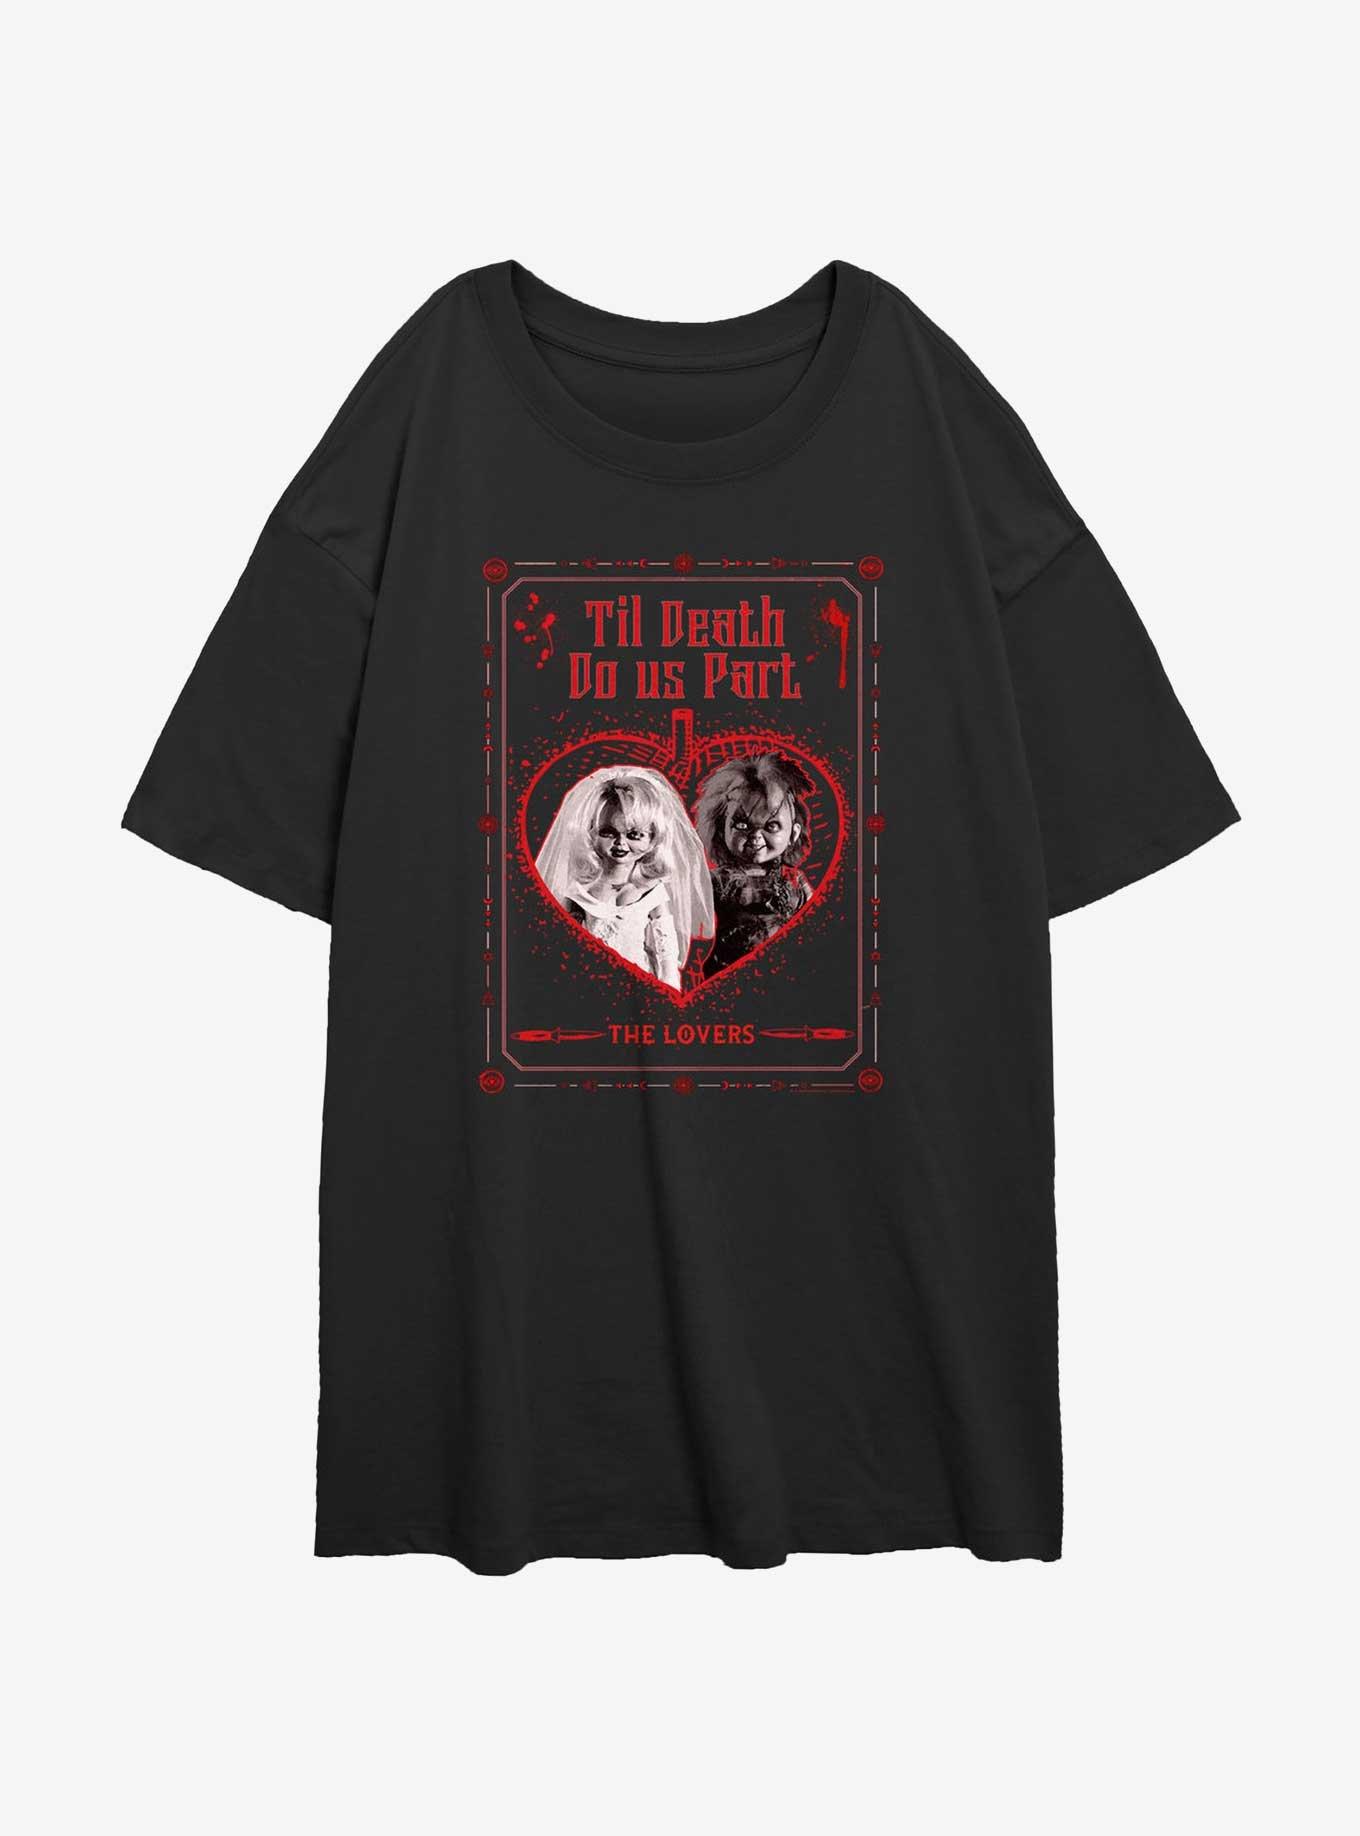 Bride of Chucky The Lovers Girls Oversized T-Shirt